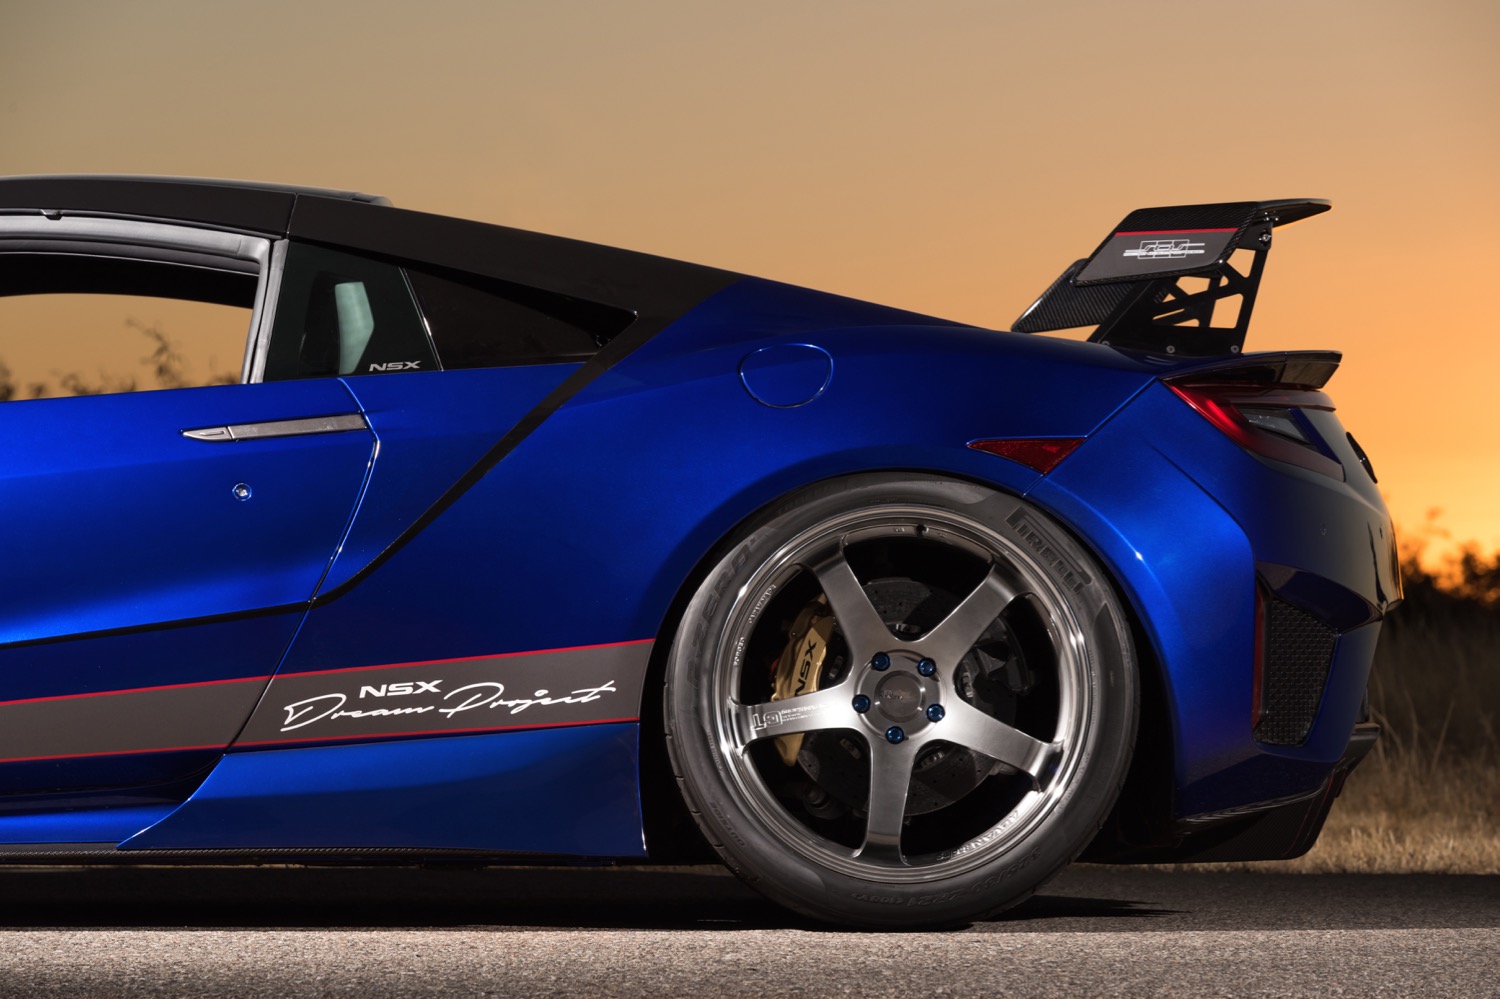 Acura NSX "Dream Project" by ScienceofSpeed